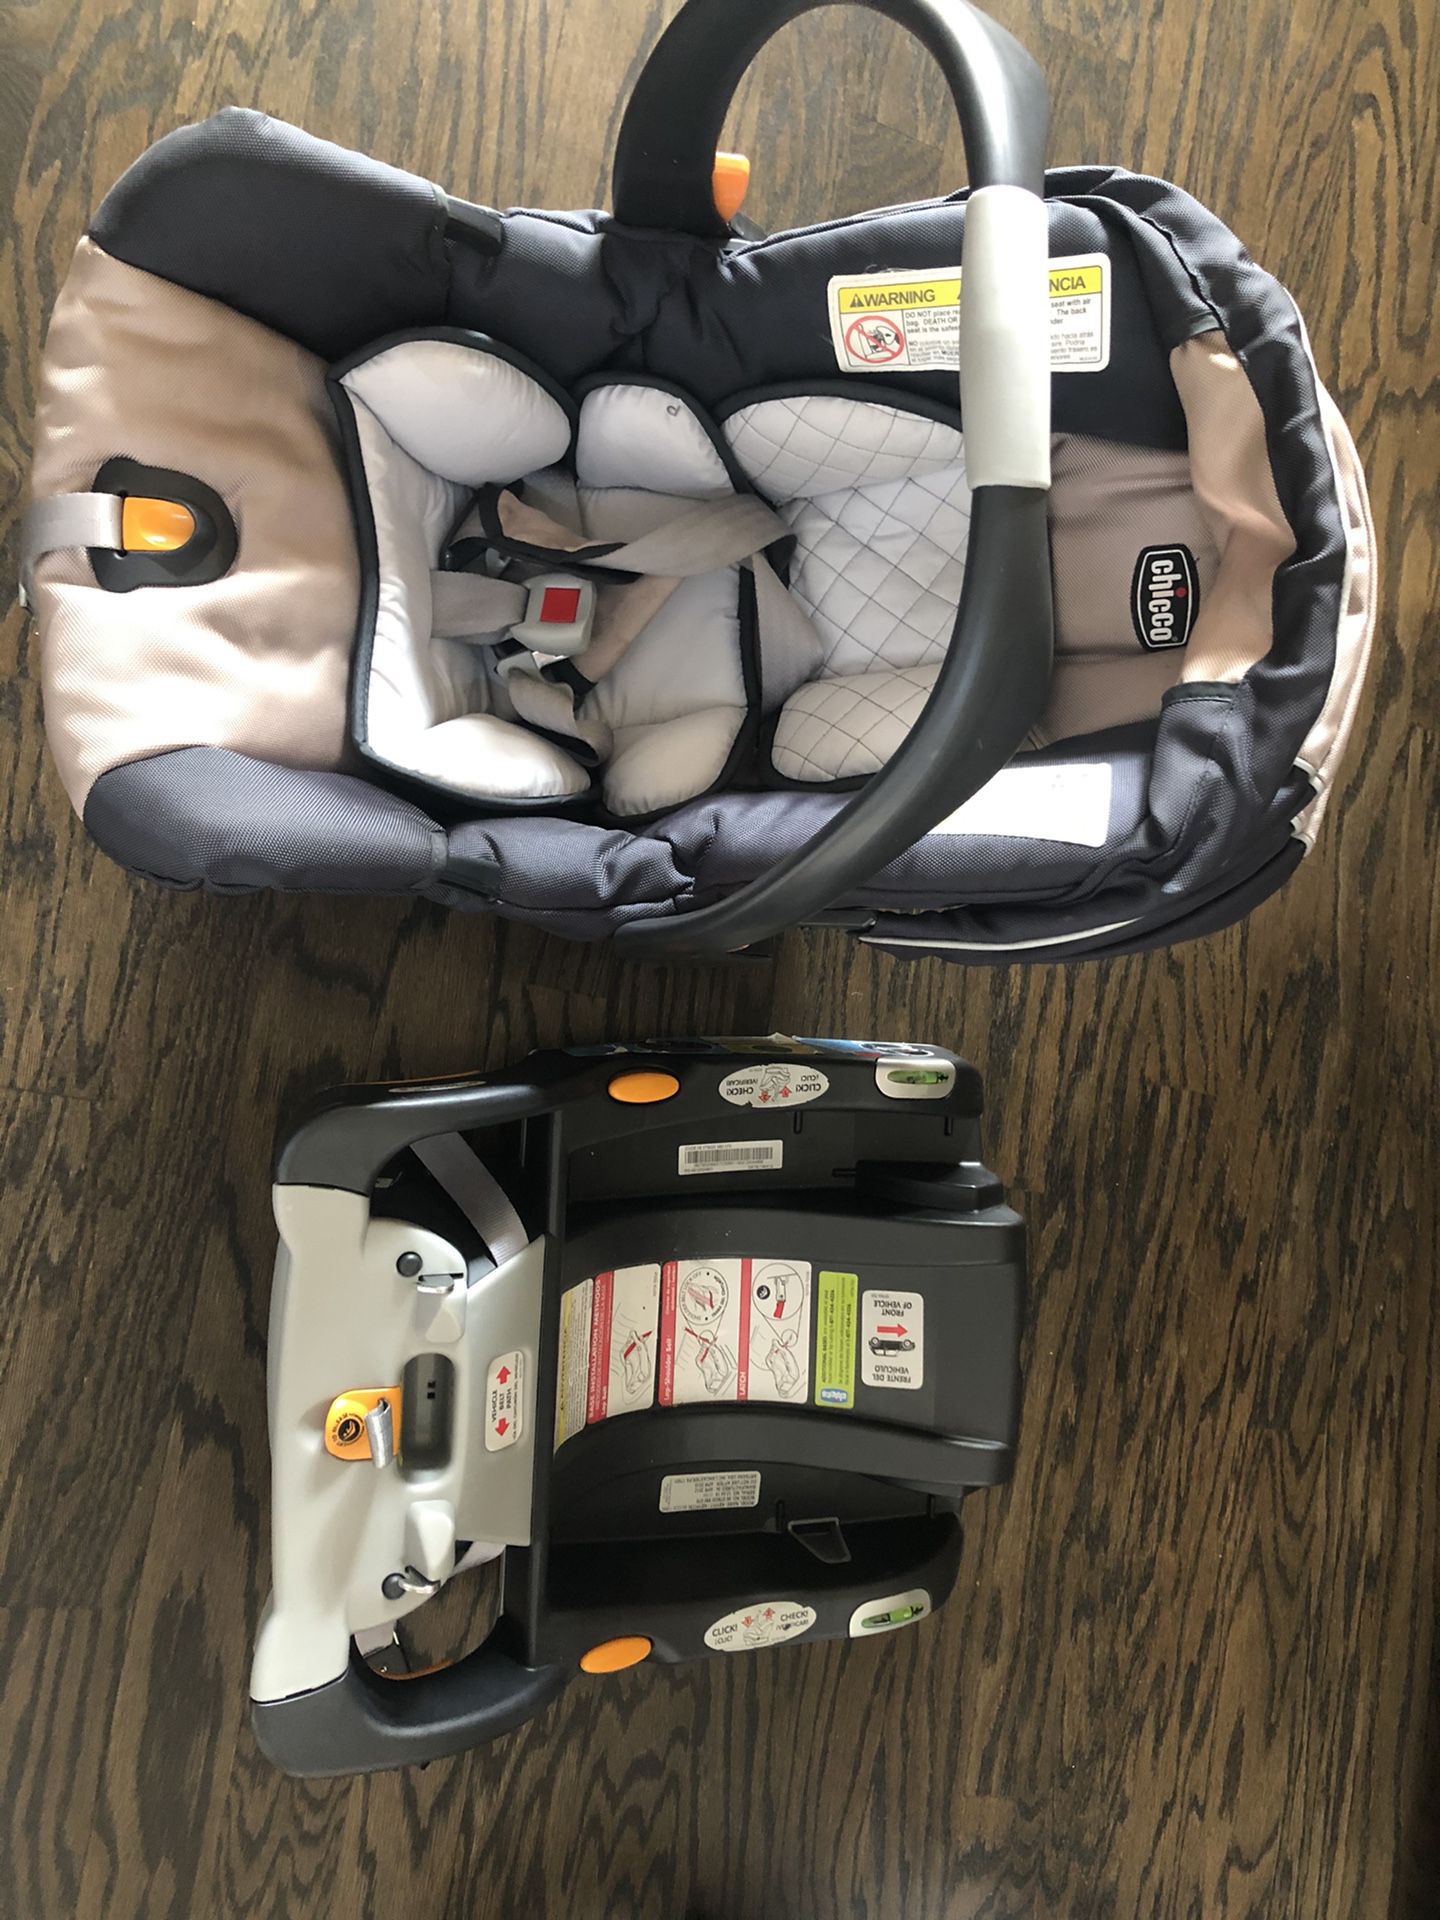 Chicco Keyfit 30 infant Carrier plus base qty. 2 each (not expired)